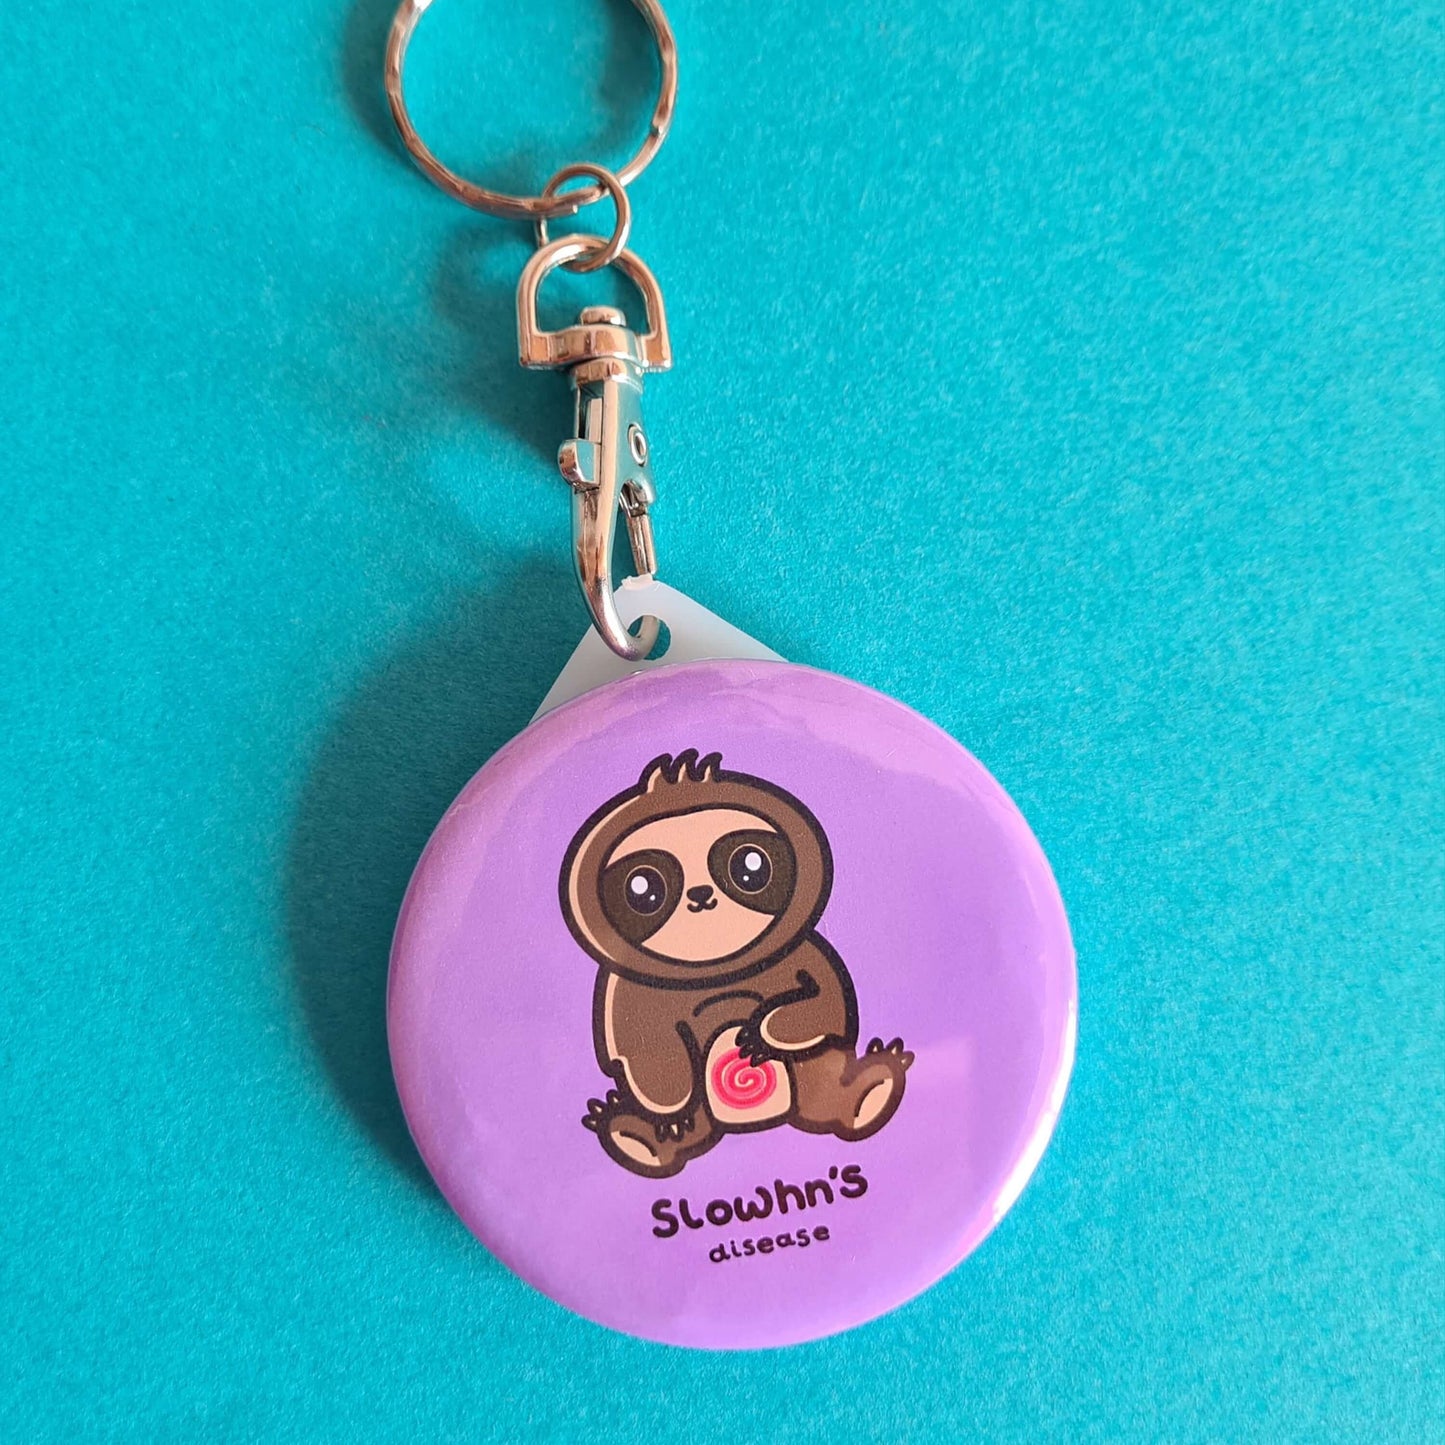 The Slowhn's Disease Sloth Keyring - Crohn's Disease on a blue background. The silver lobster clip pink plastic circular keyring of a smiling sat down brown sloth clutching its swirly red tummy and black text underneath reading 'slowhn's disease'. The hand made design is raising awareness for crohn's disease.